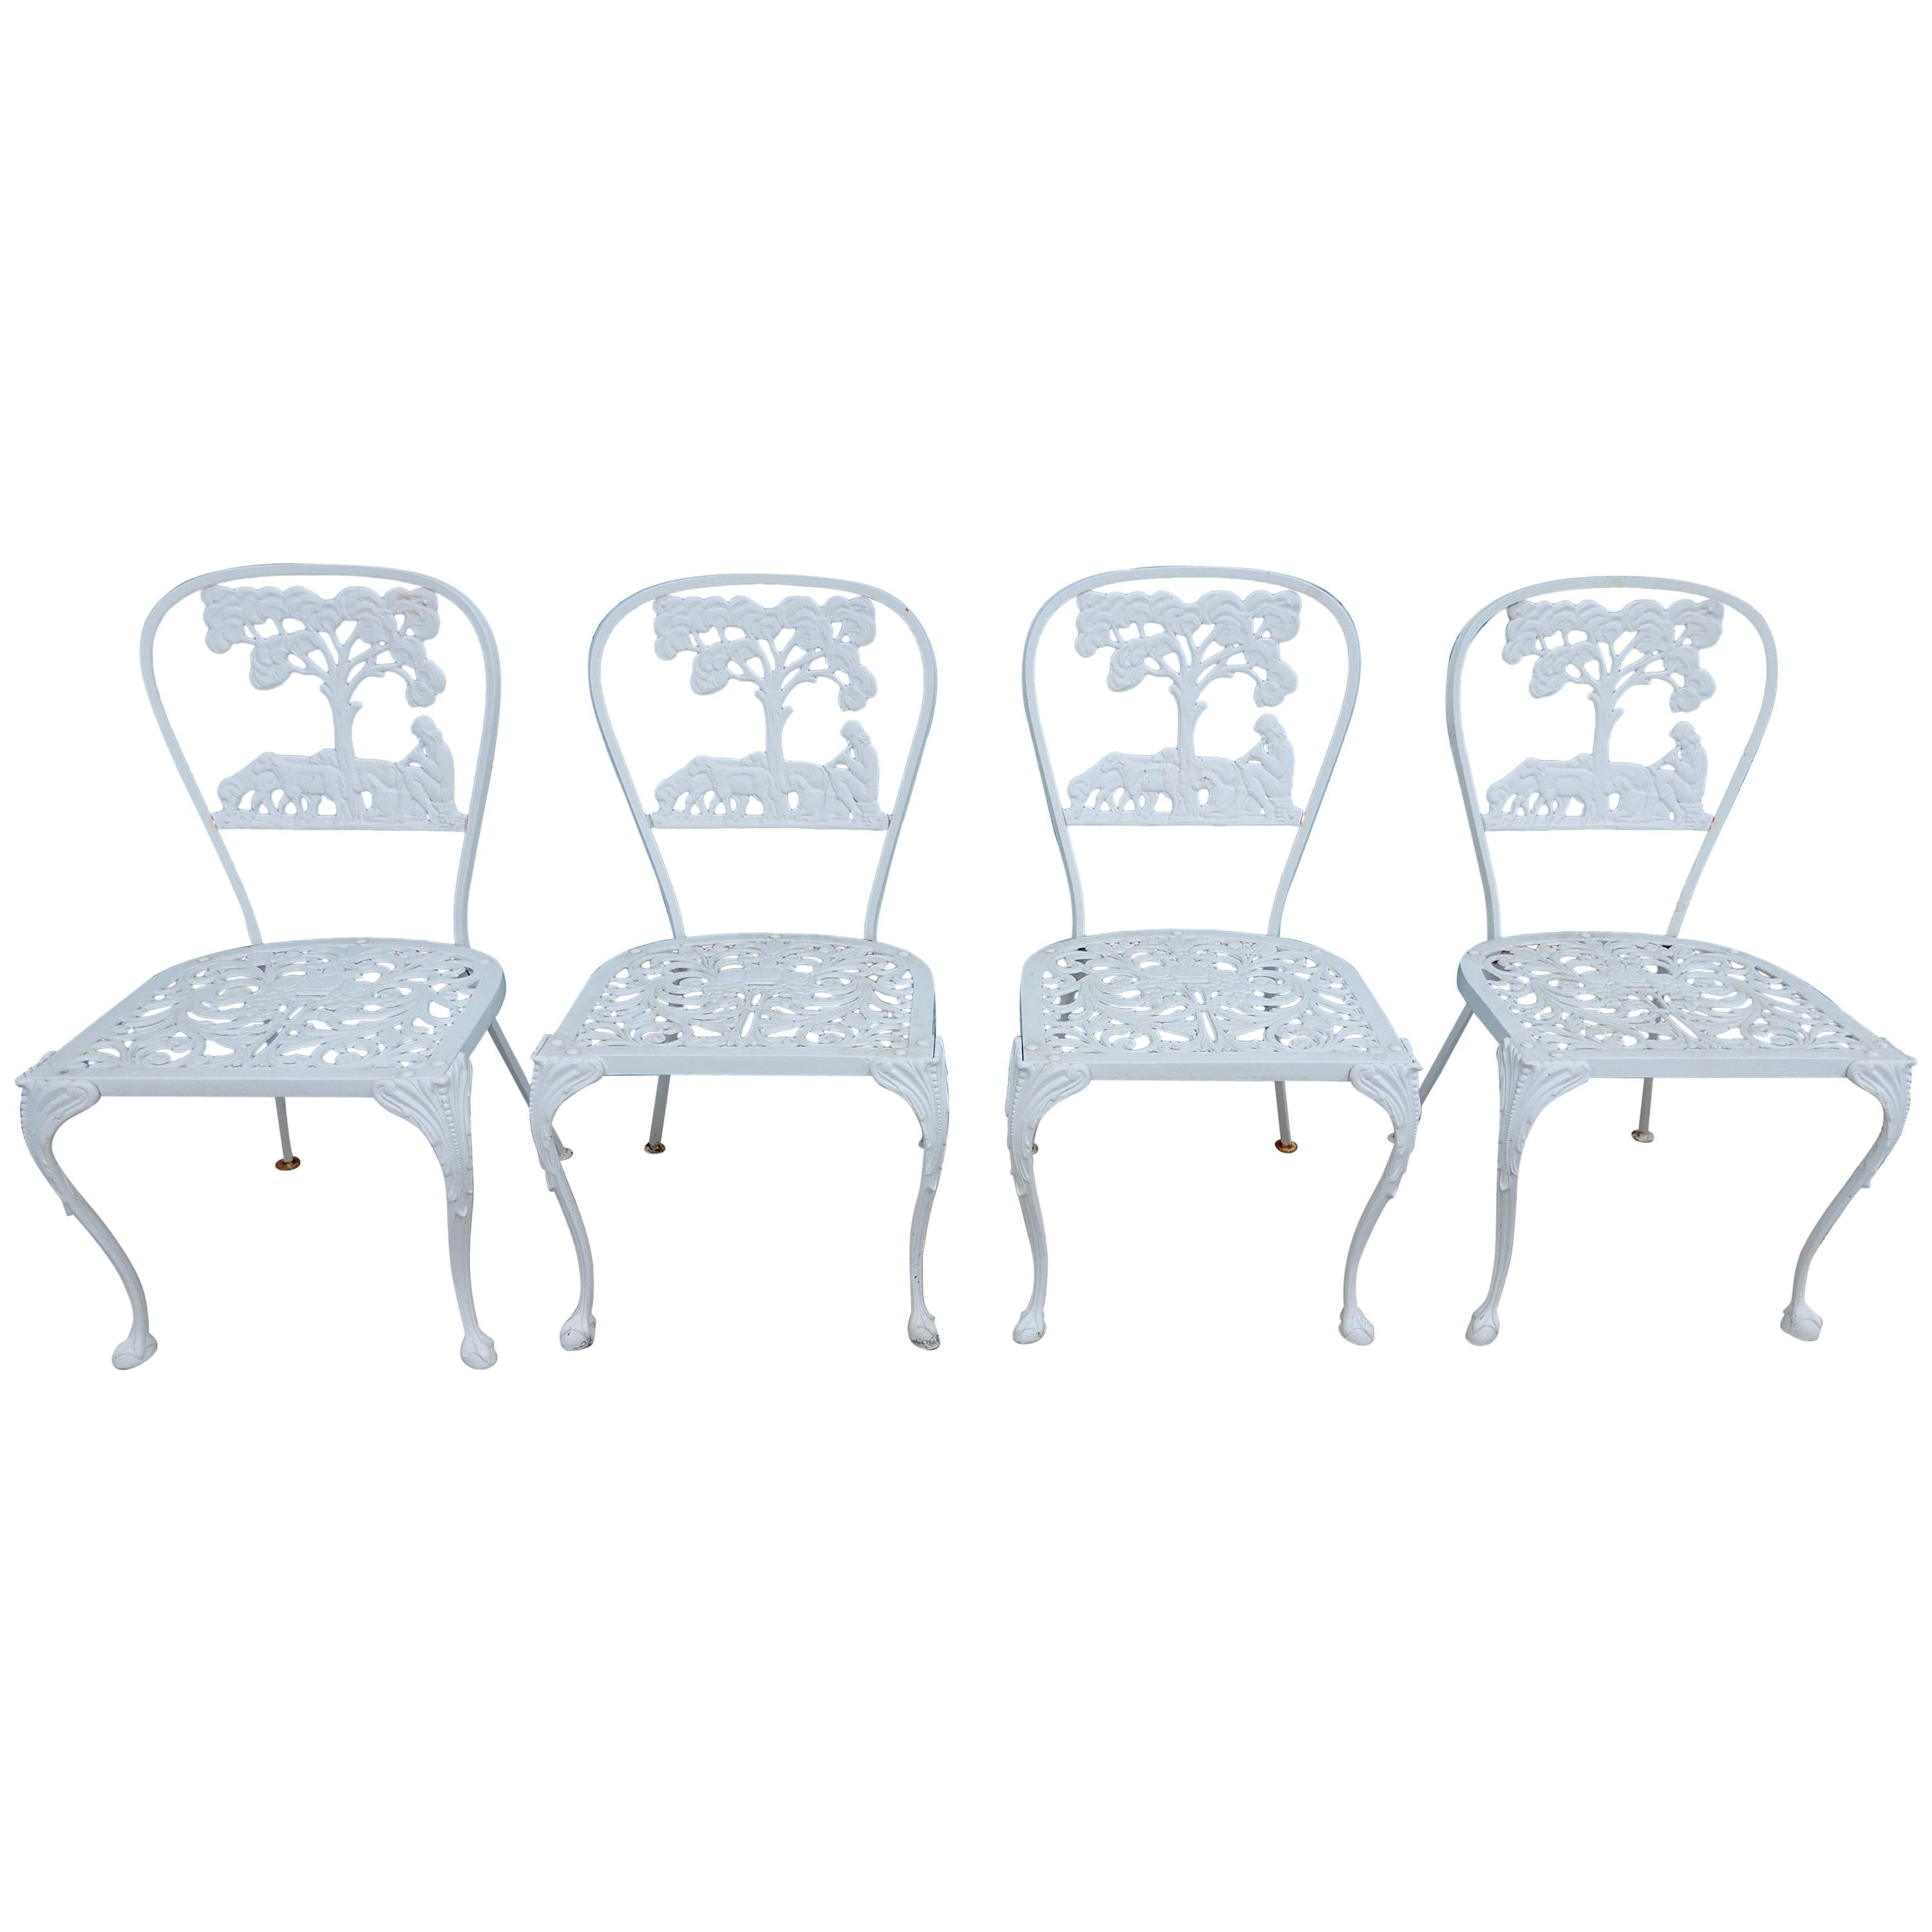 Molla Dining Chairs Figural Cast Aluminum im Angebot